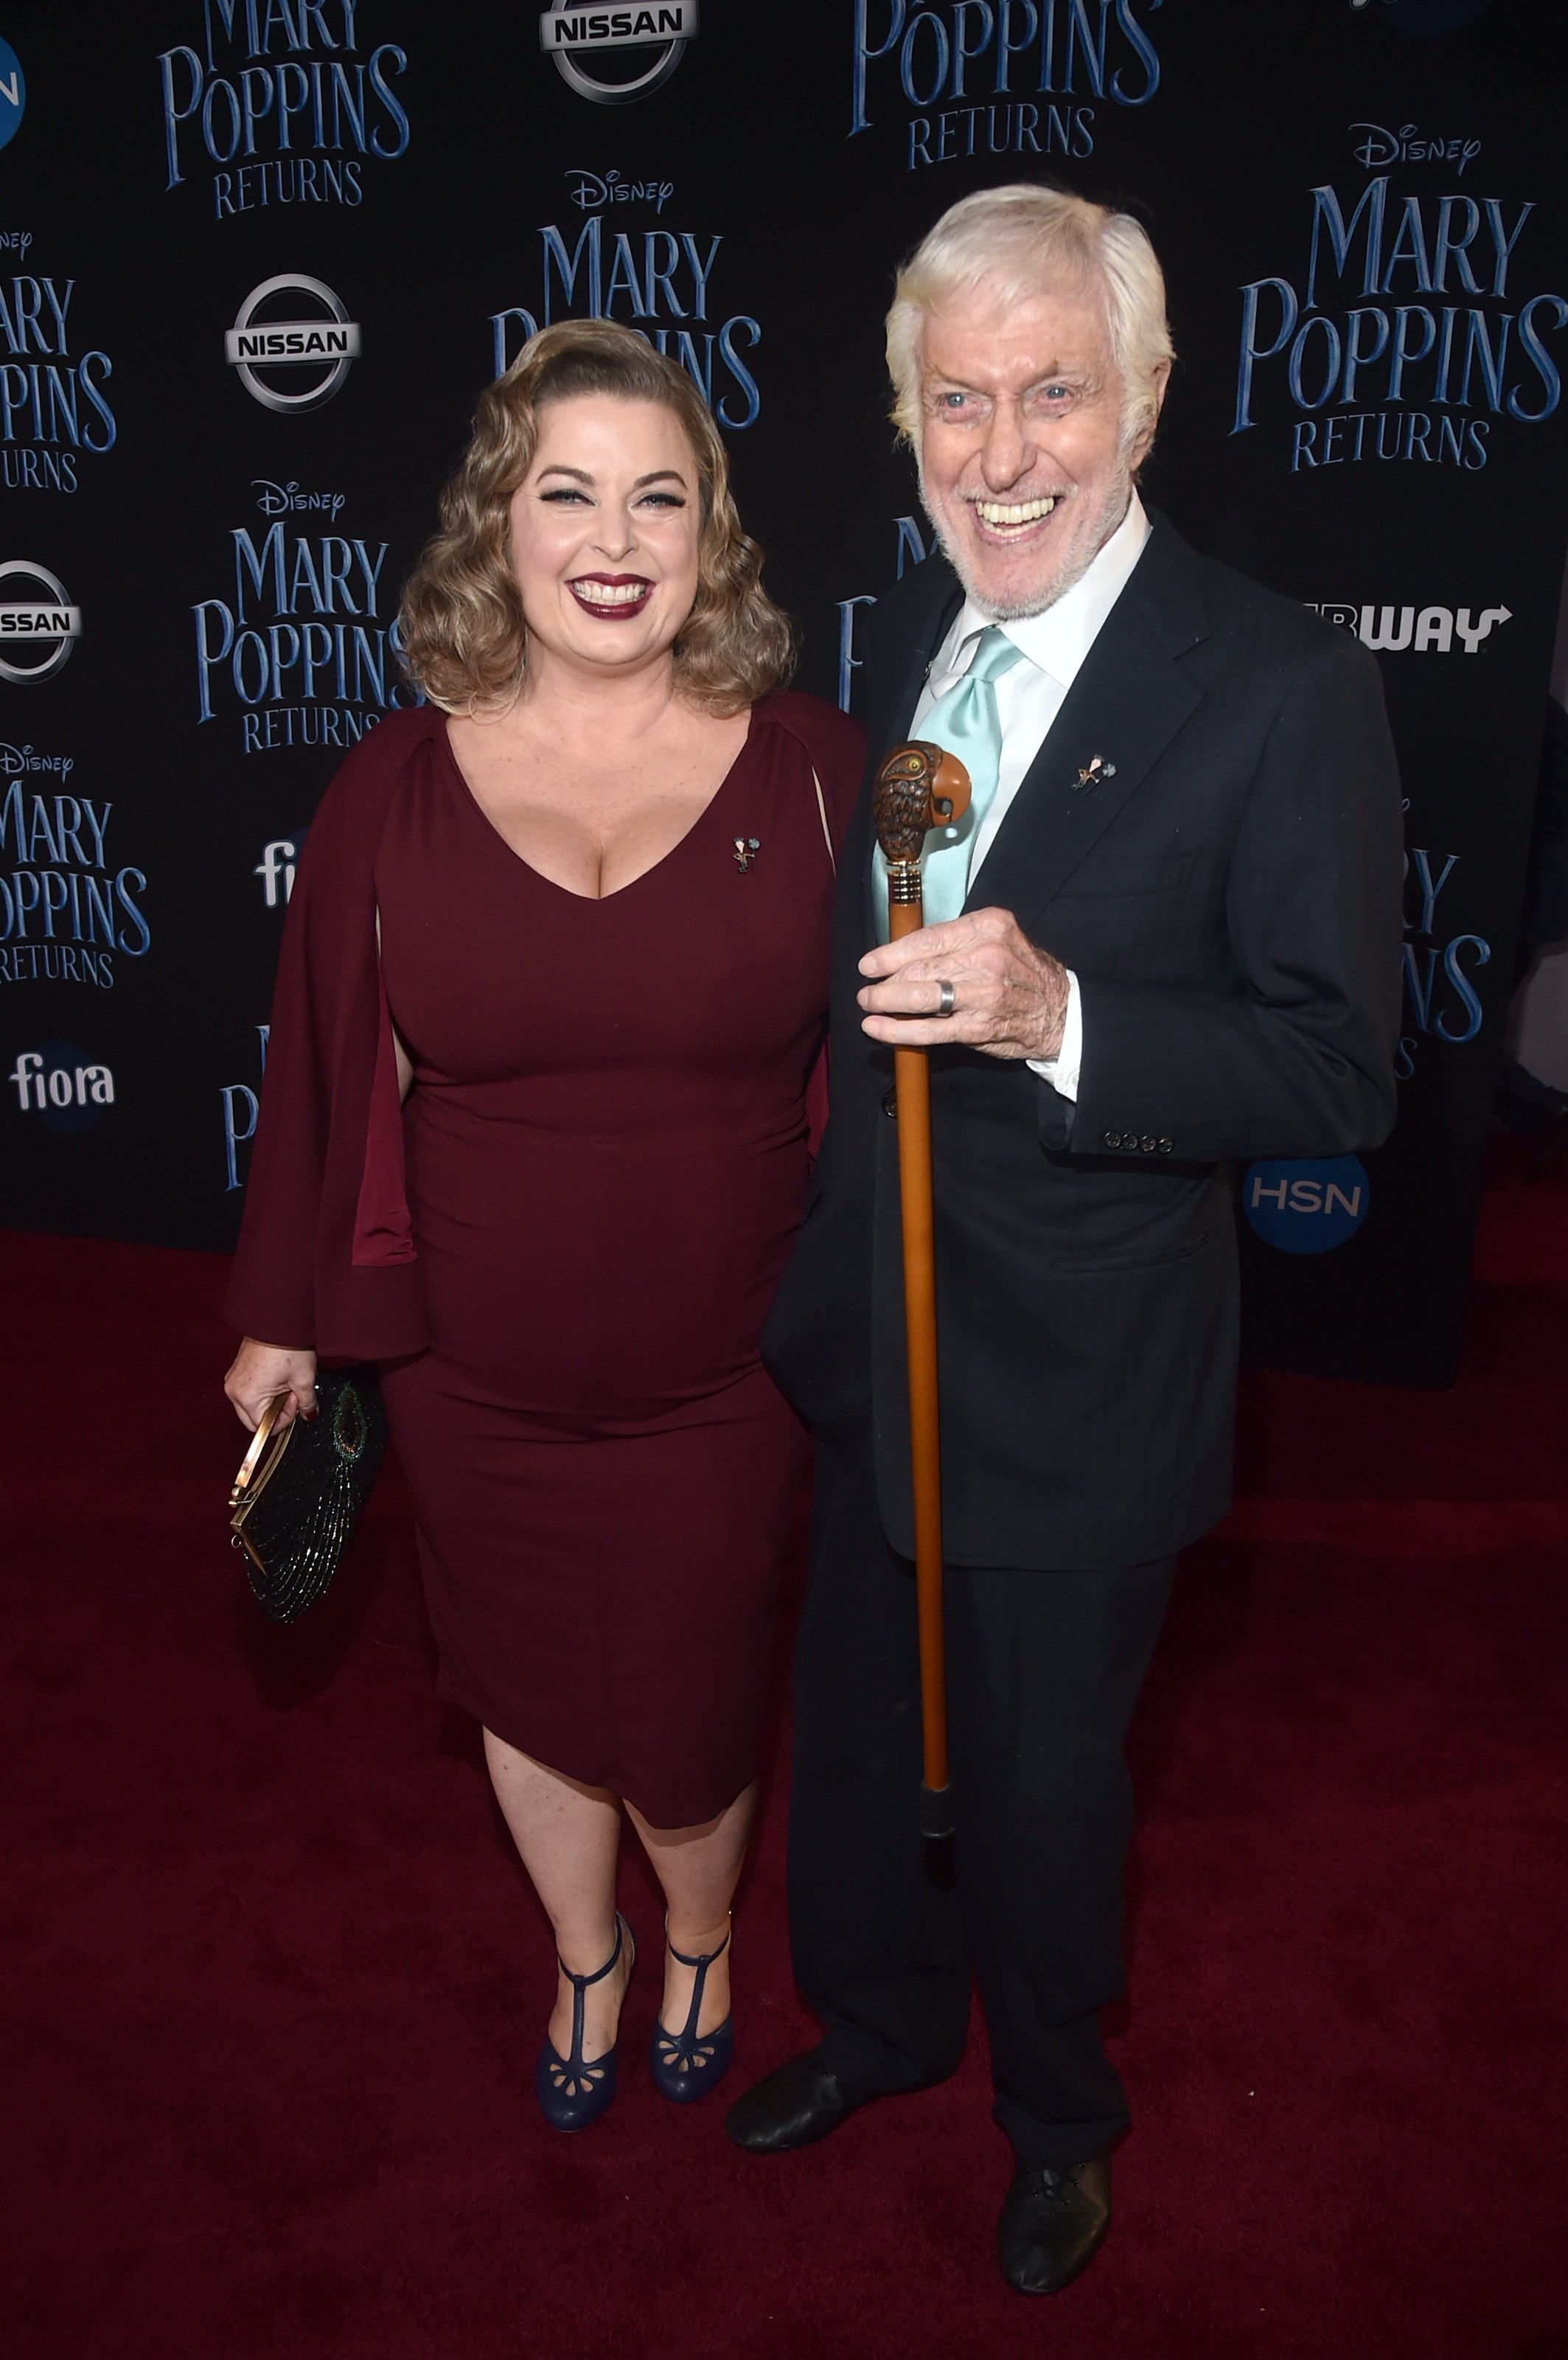 Arlene Silver and Actor Dick Van Dyke attend Disney's 'Mary Poppins Returns' World Premiere at the Dolby Theatre on November 29, 2018, in Hollywood, California. | Source: Getty Images